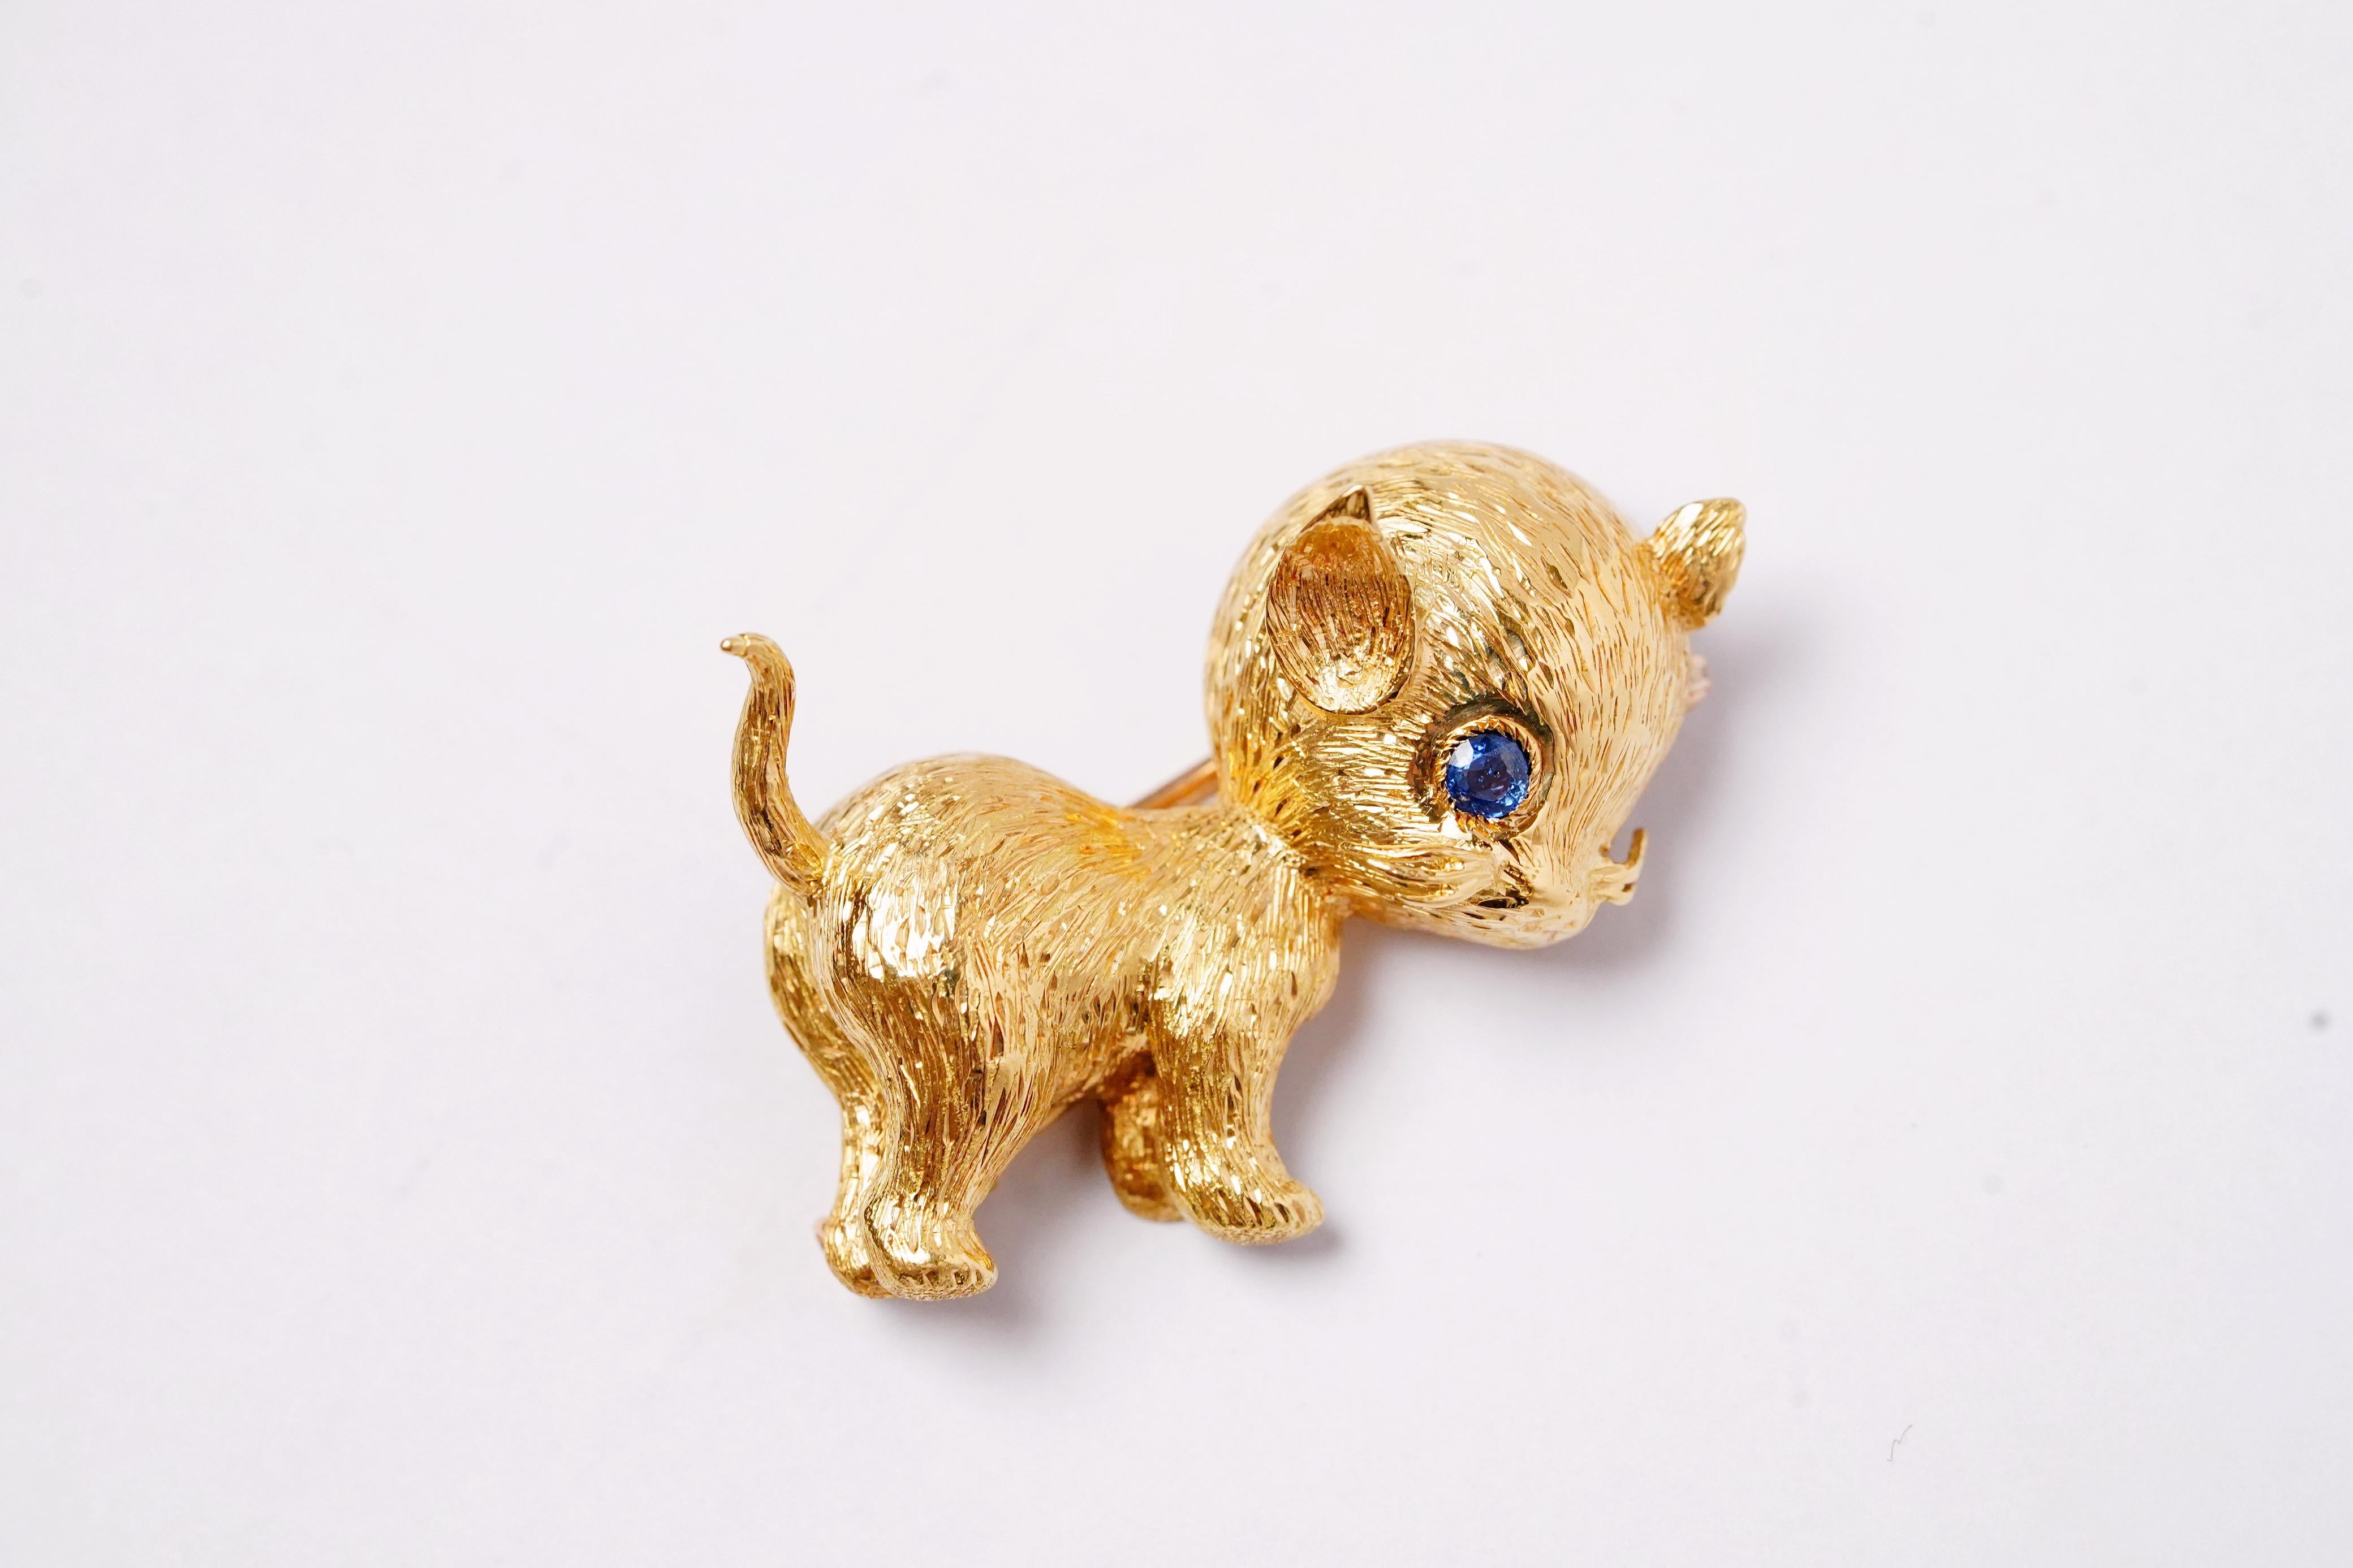 This beautifully designed and masterfully hand-crafted kitten brooch is from Kirby Paris, a French high-end jewellery brand.
The brooch has been modelled in the form of a charming kitten, which makes it a stunning piece of jewellery that is both